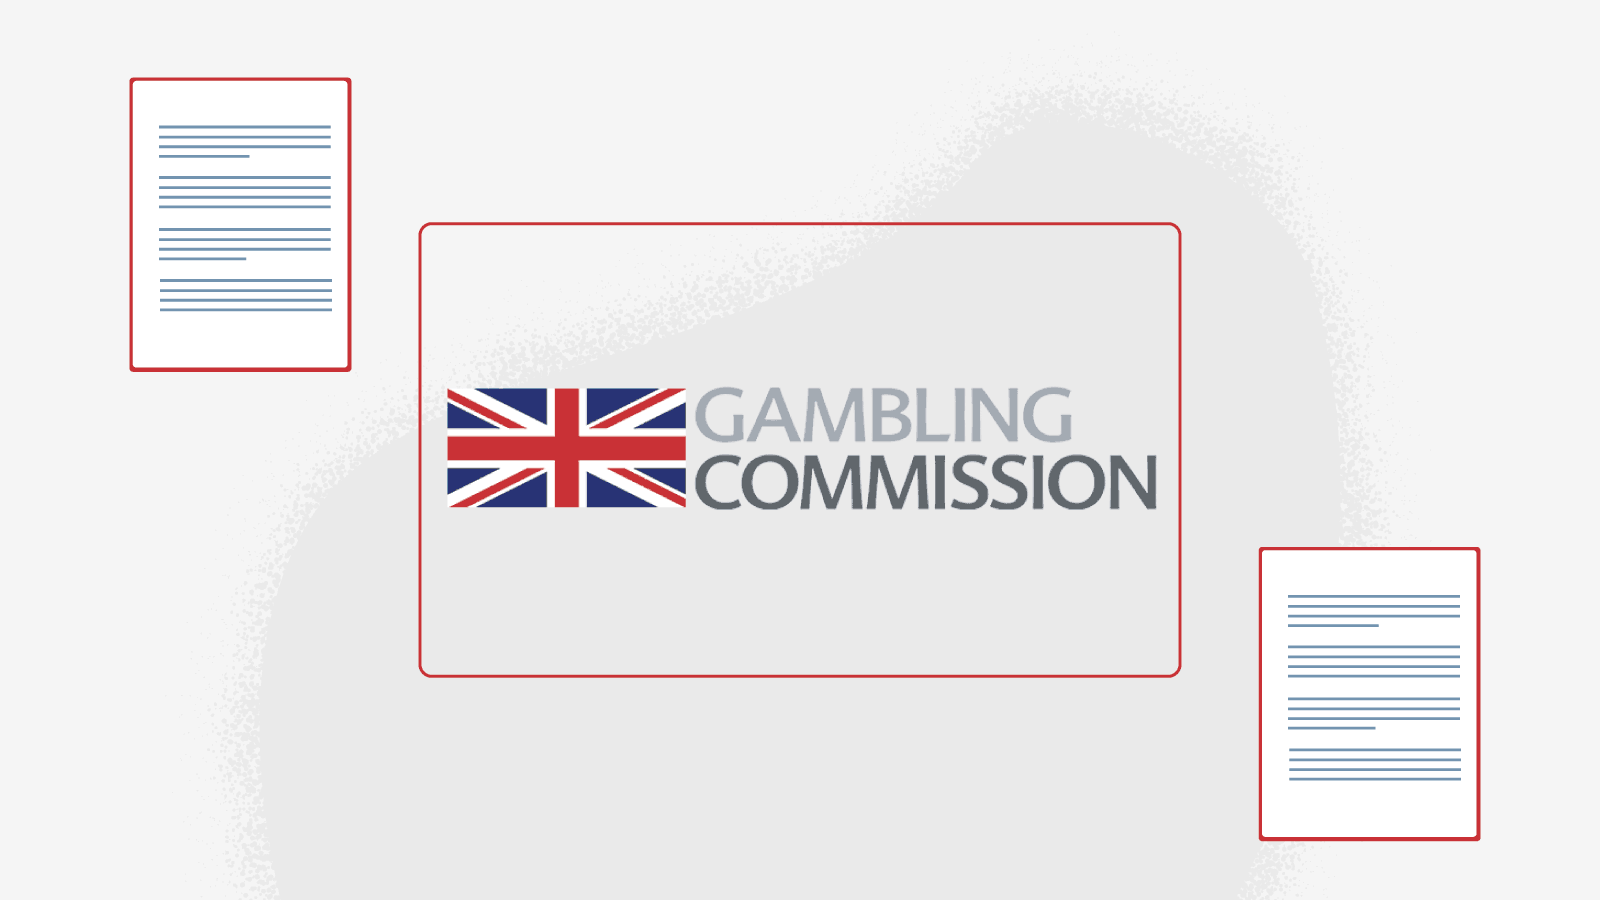 UKGC – the ultimate licensing authority in the UK